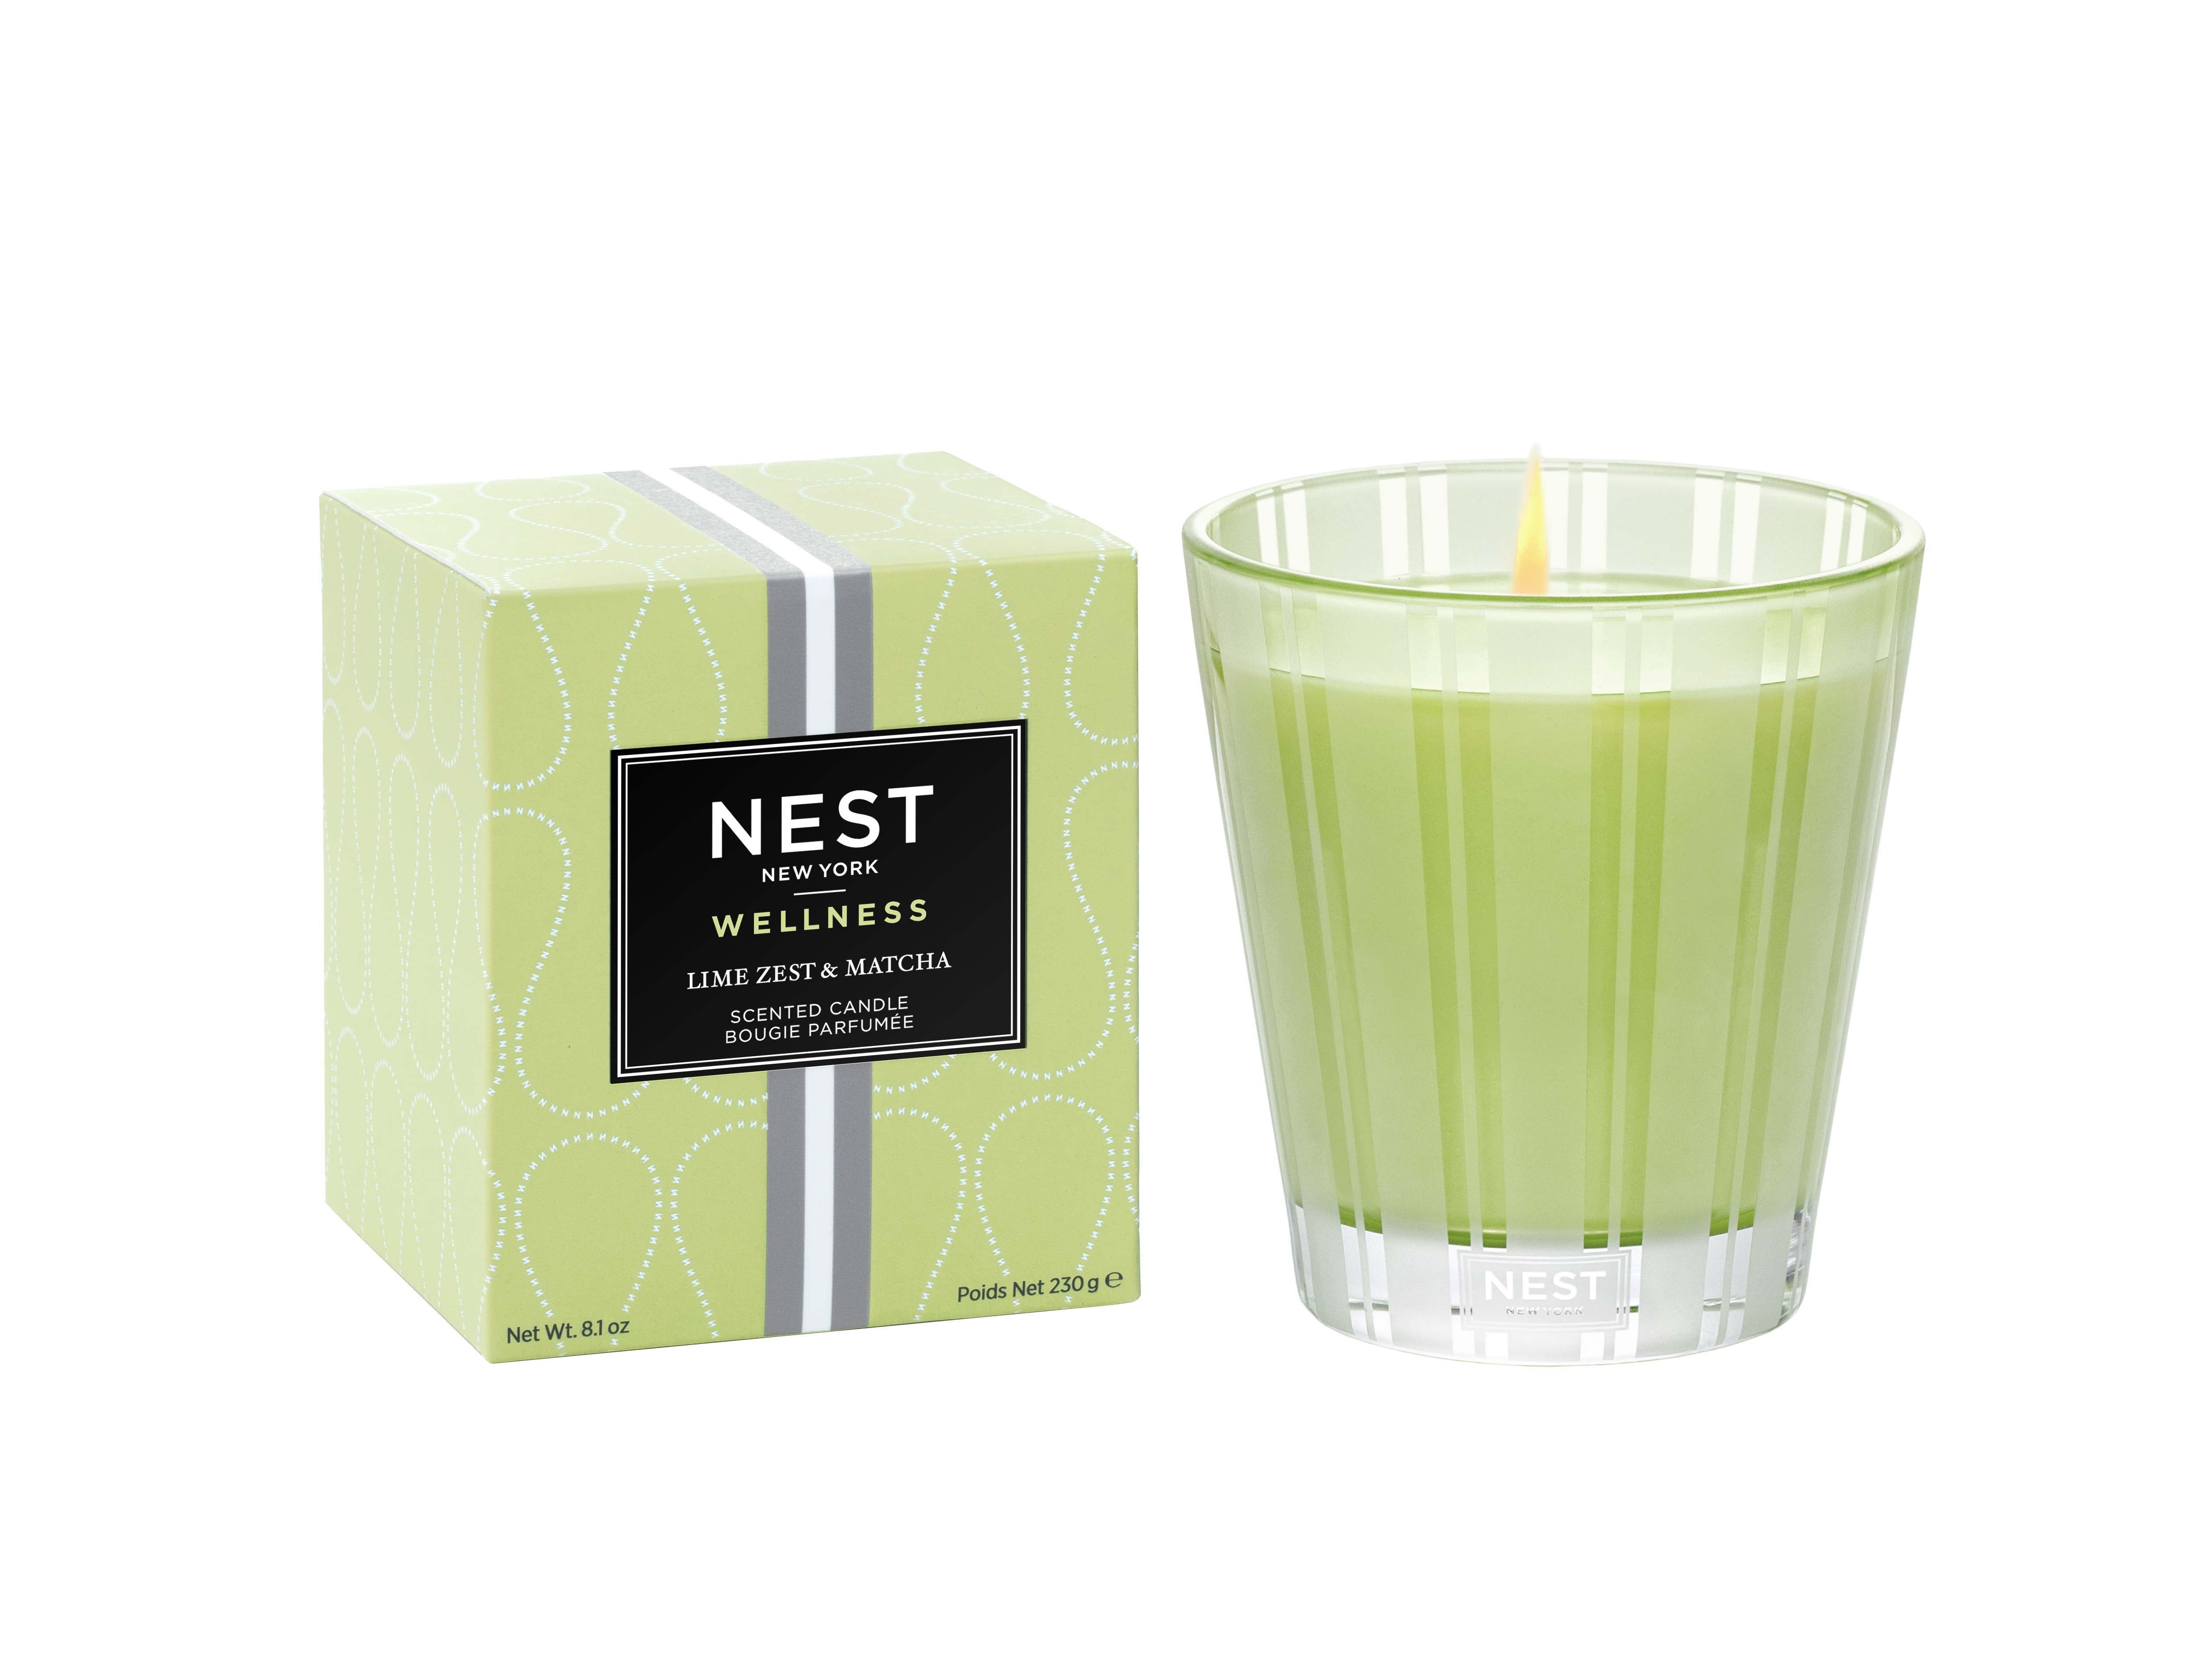 Lime Zest & Matcha Classic Candle 8.1 oz by Nest New York







